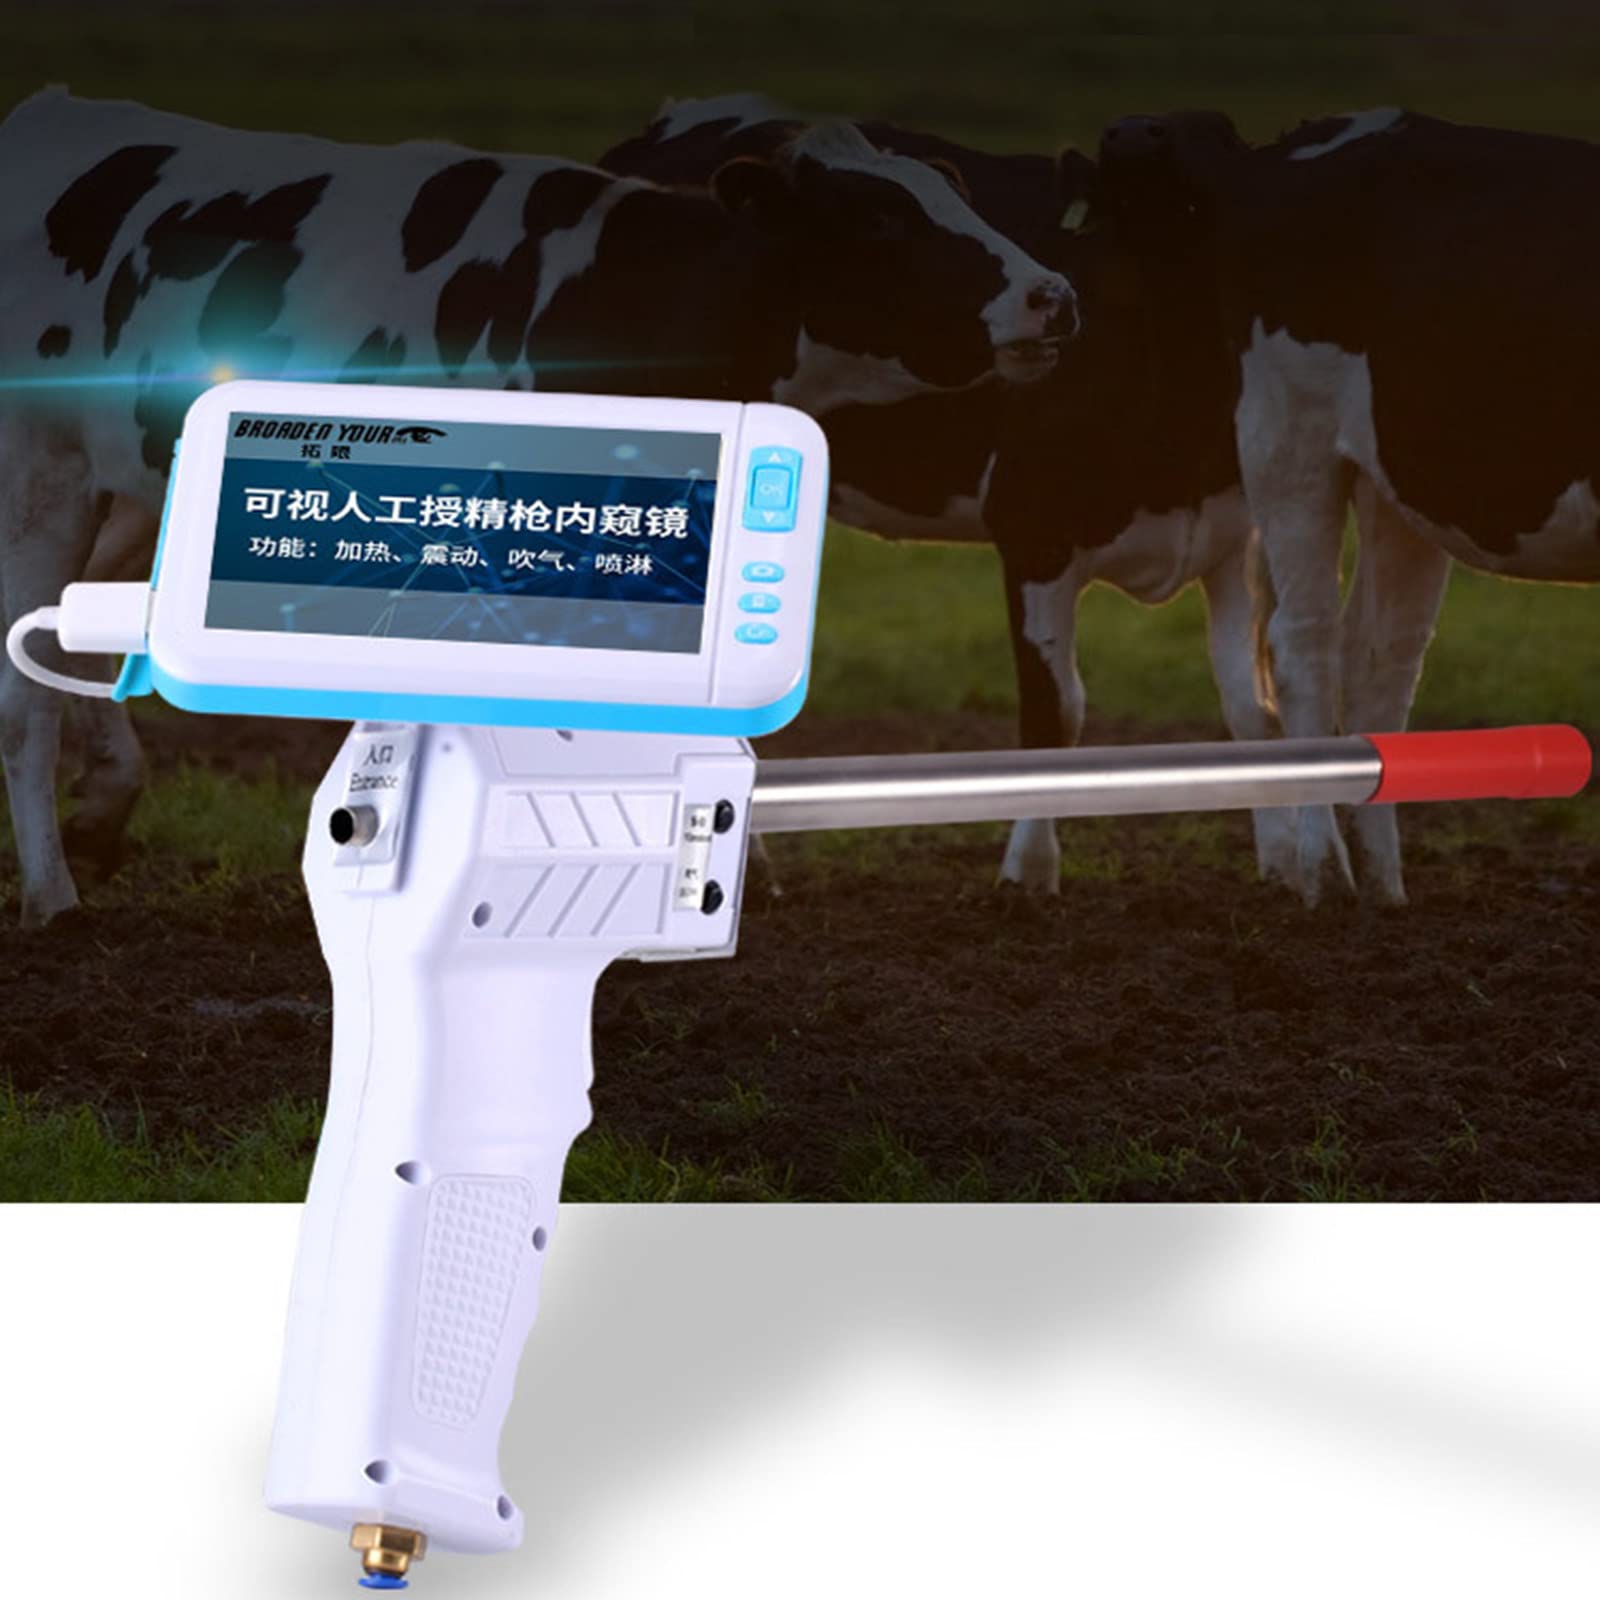 Ben Zhan Professional Artificial Insemination Gun with Visual LCD Screen Veterinary Insemination Tools for DogsPigsSheep